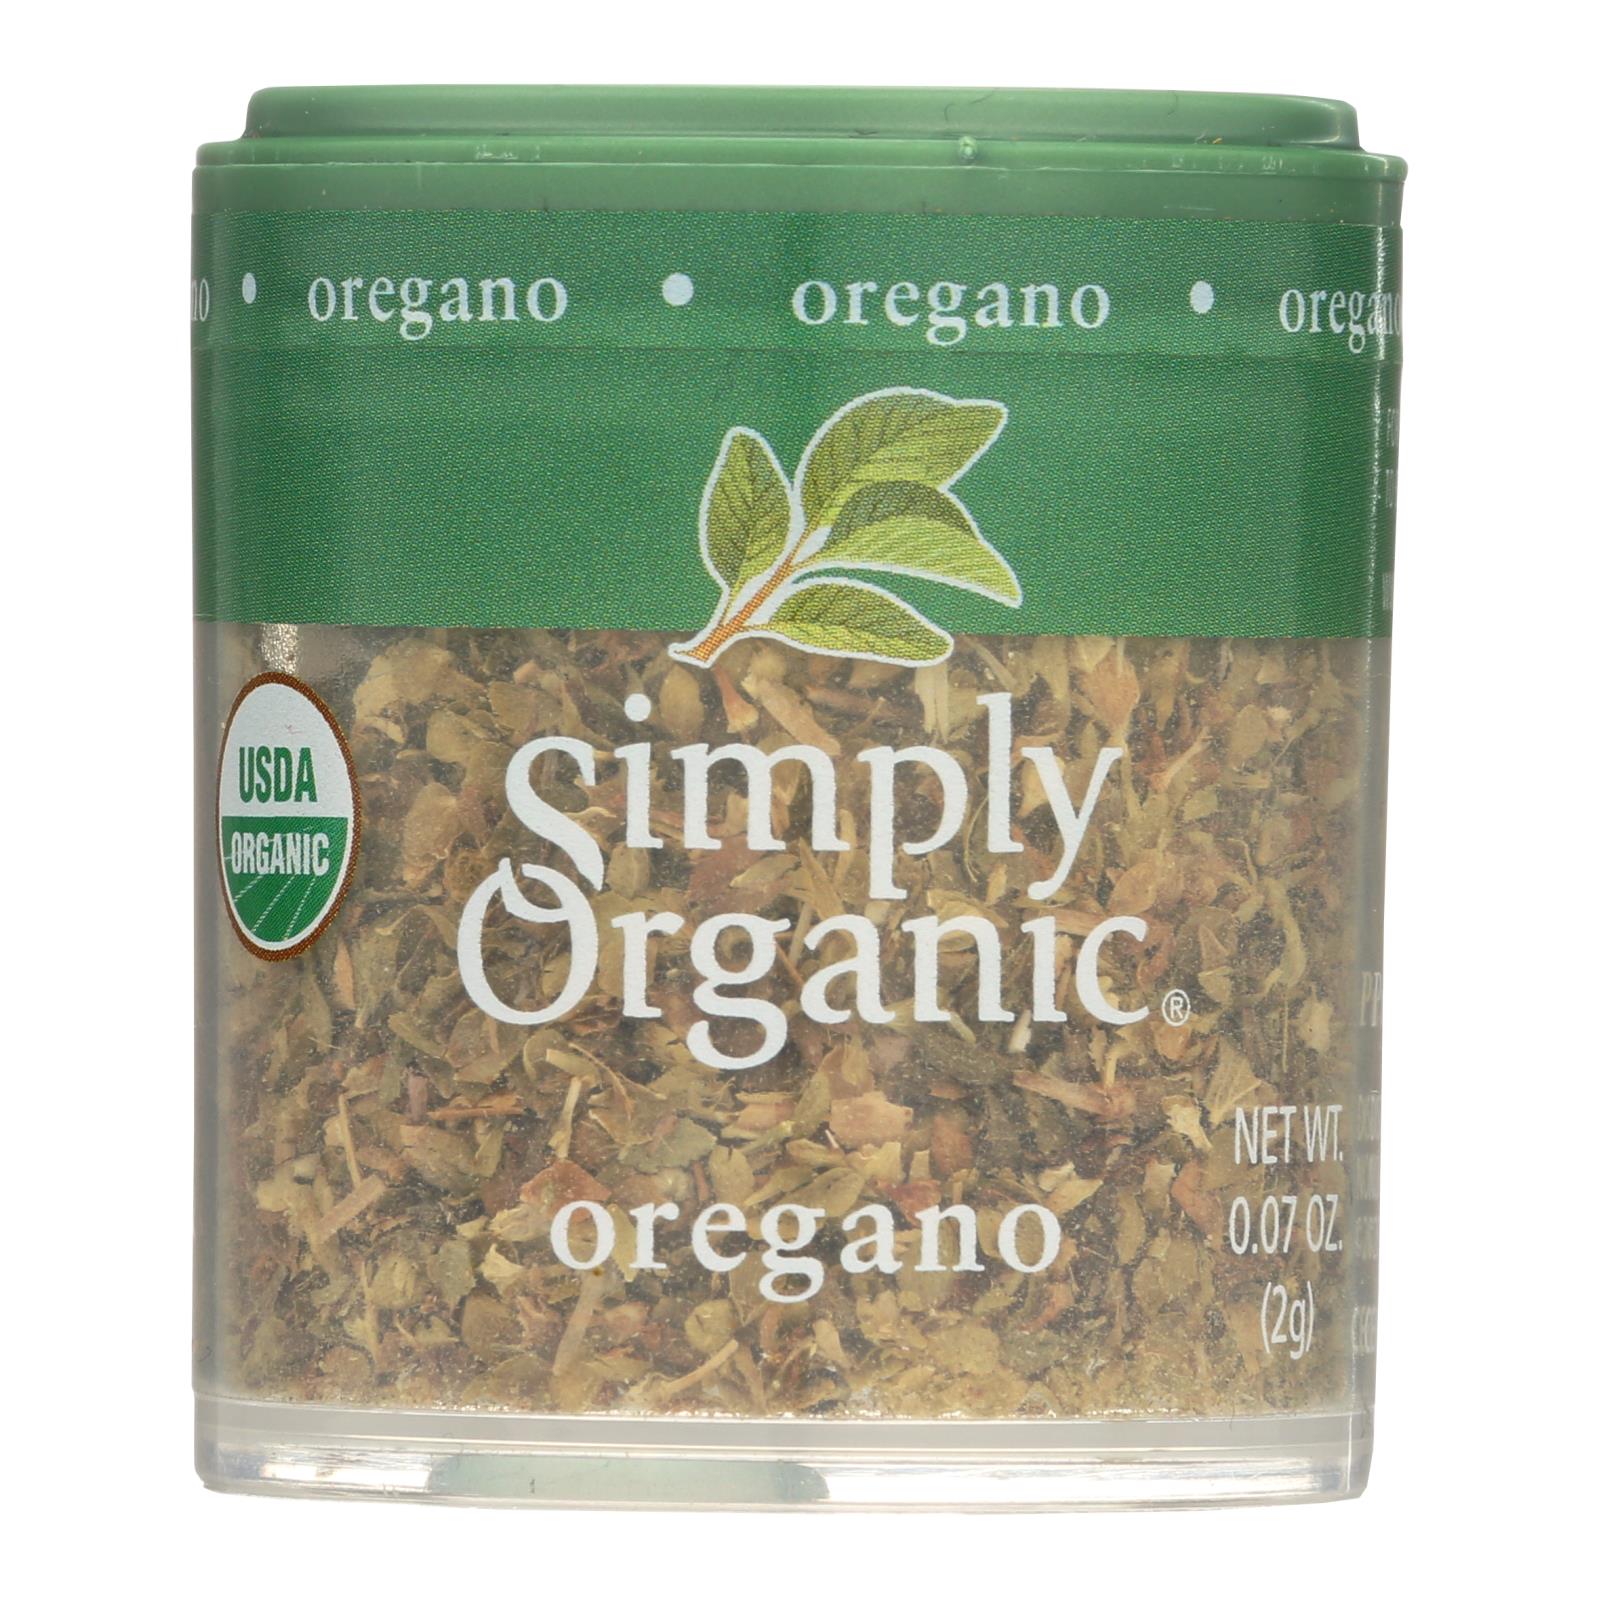 Simply Organic Oregano Leaf - Organic - Cut And Sifted - Fancy Grade - .07 Oz - Case Of 6 - Whole Green Foods